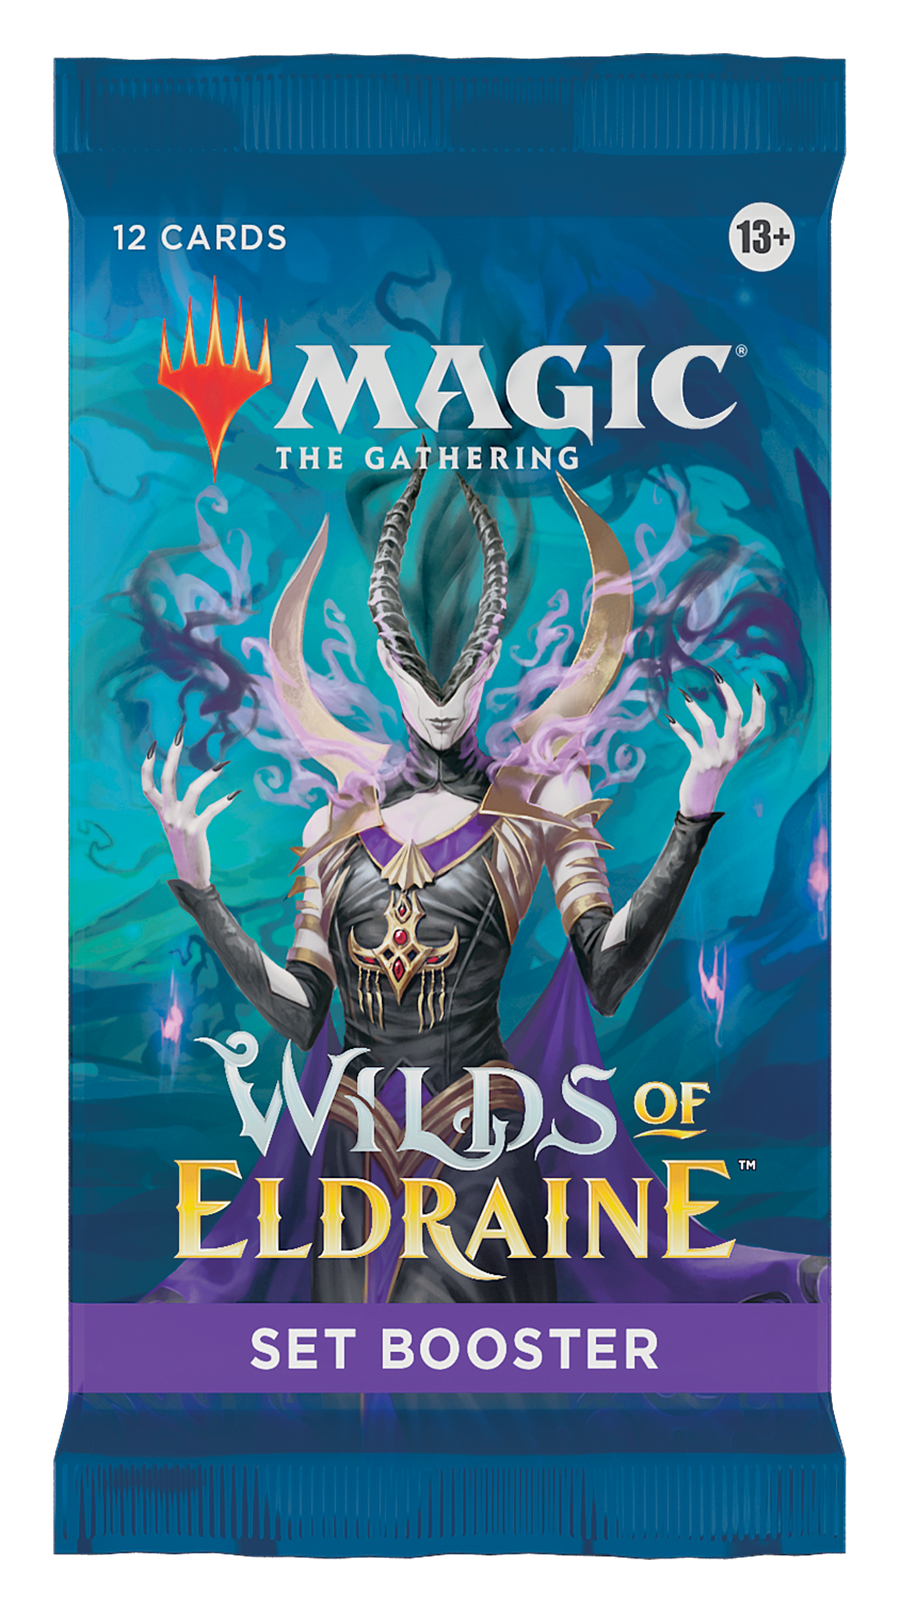 MAGIC THE GATHERING - WILDS OF ELDRAINE - SET BOOSTER BOX - ENGLISH